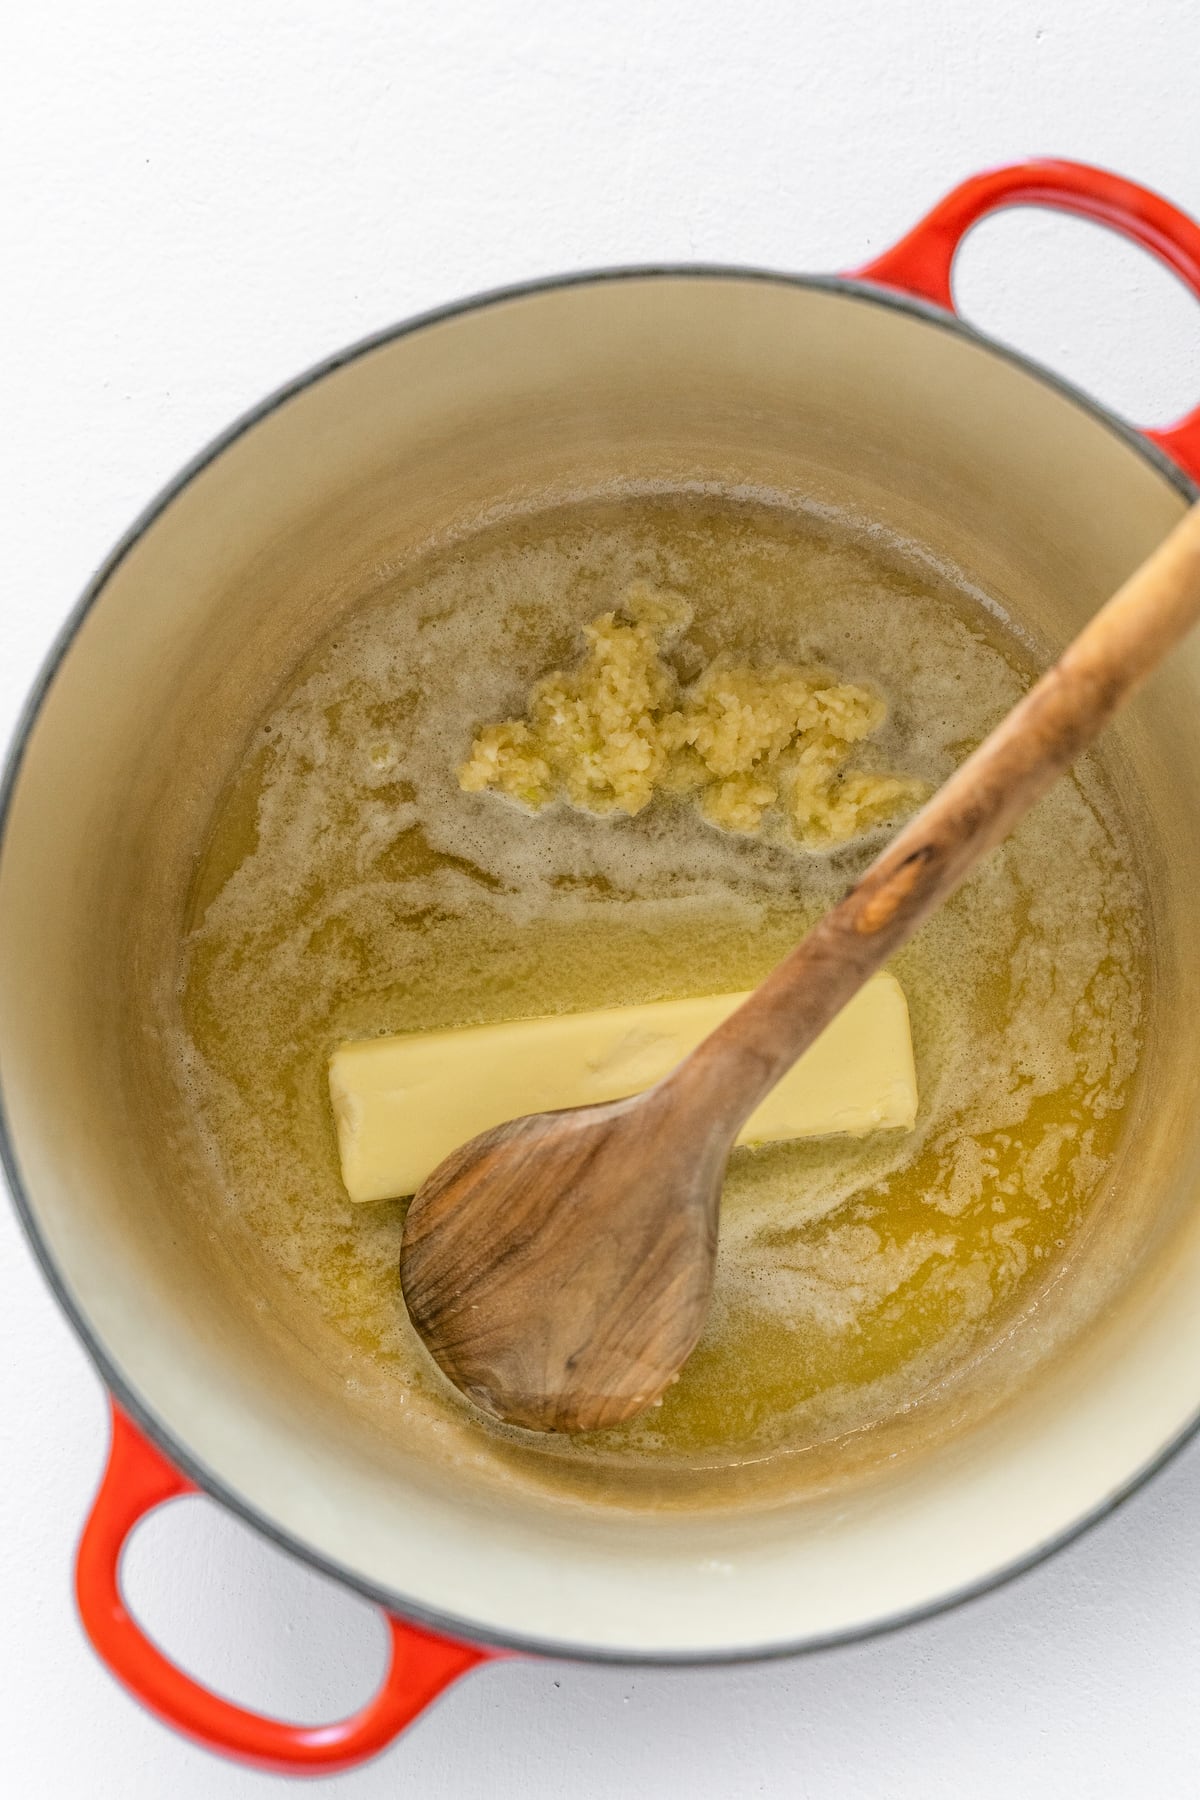 melting a whole stick of butter with garlic